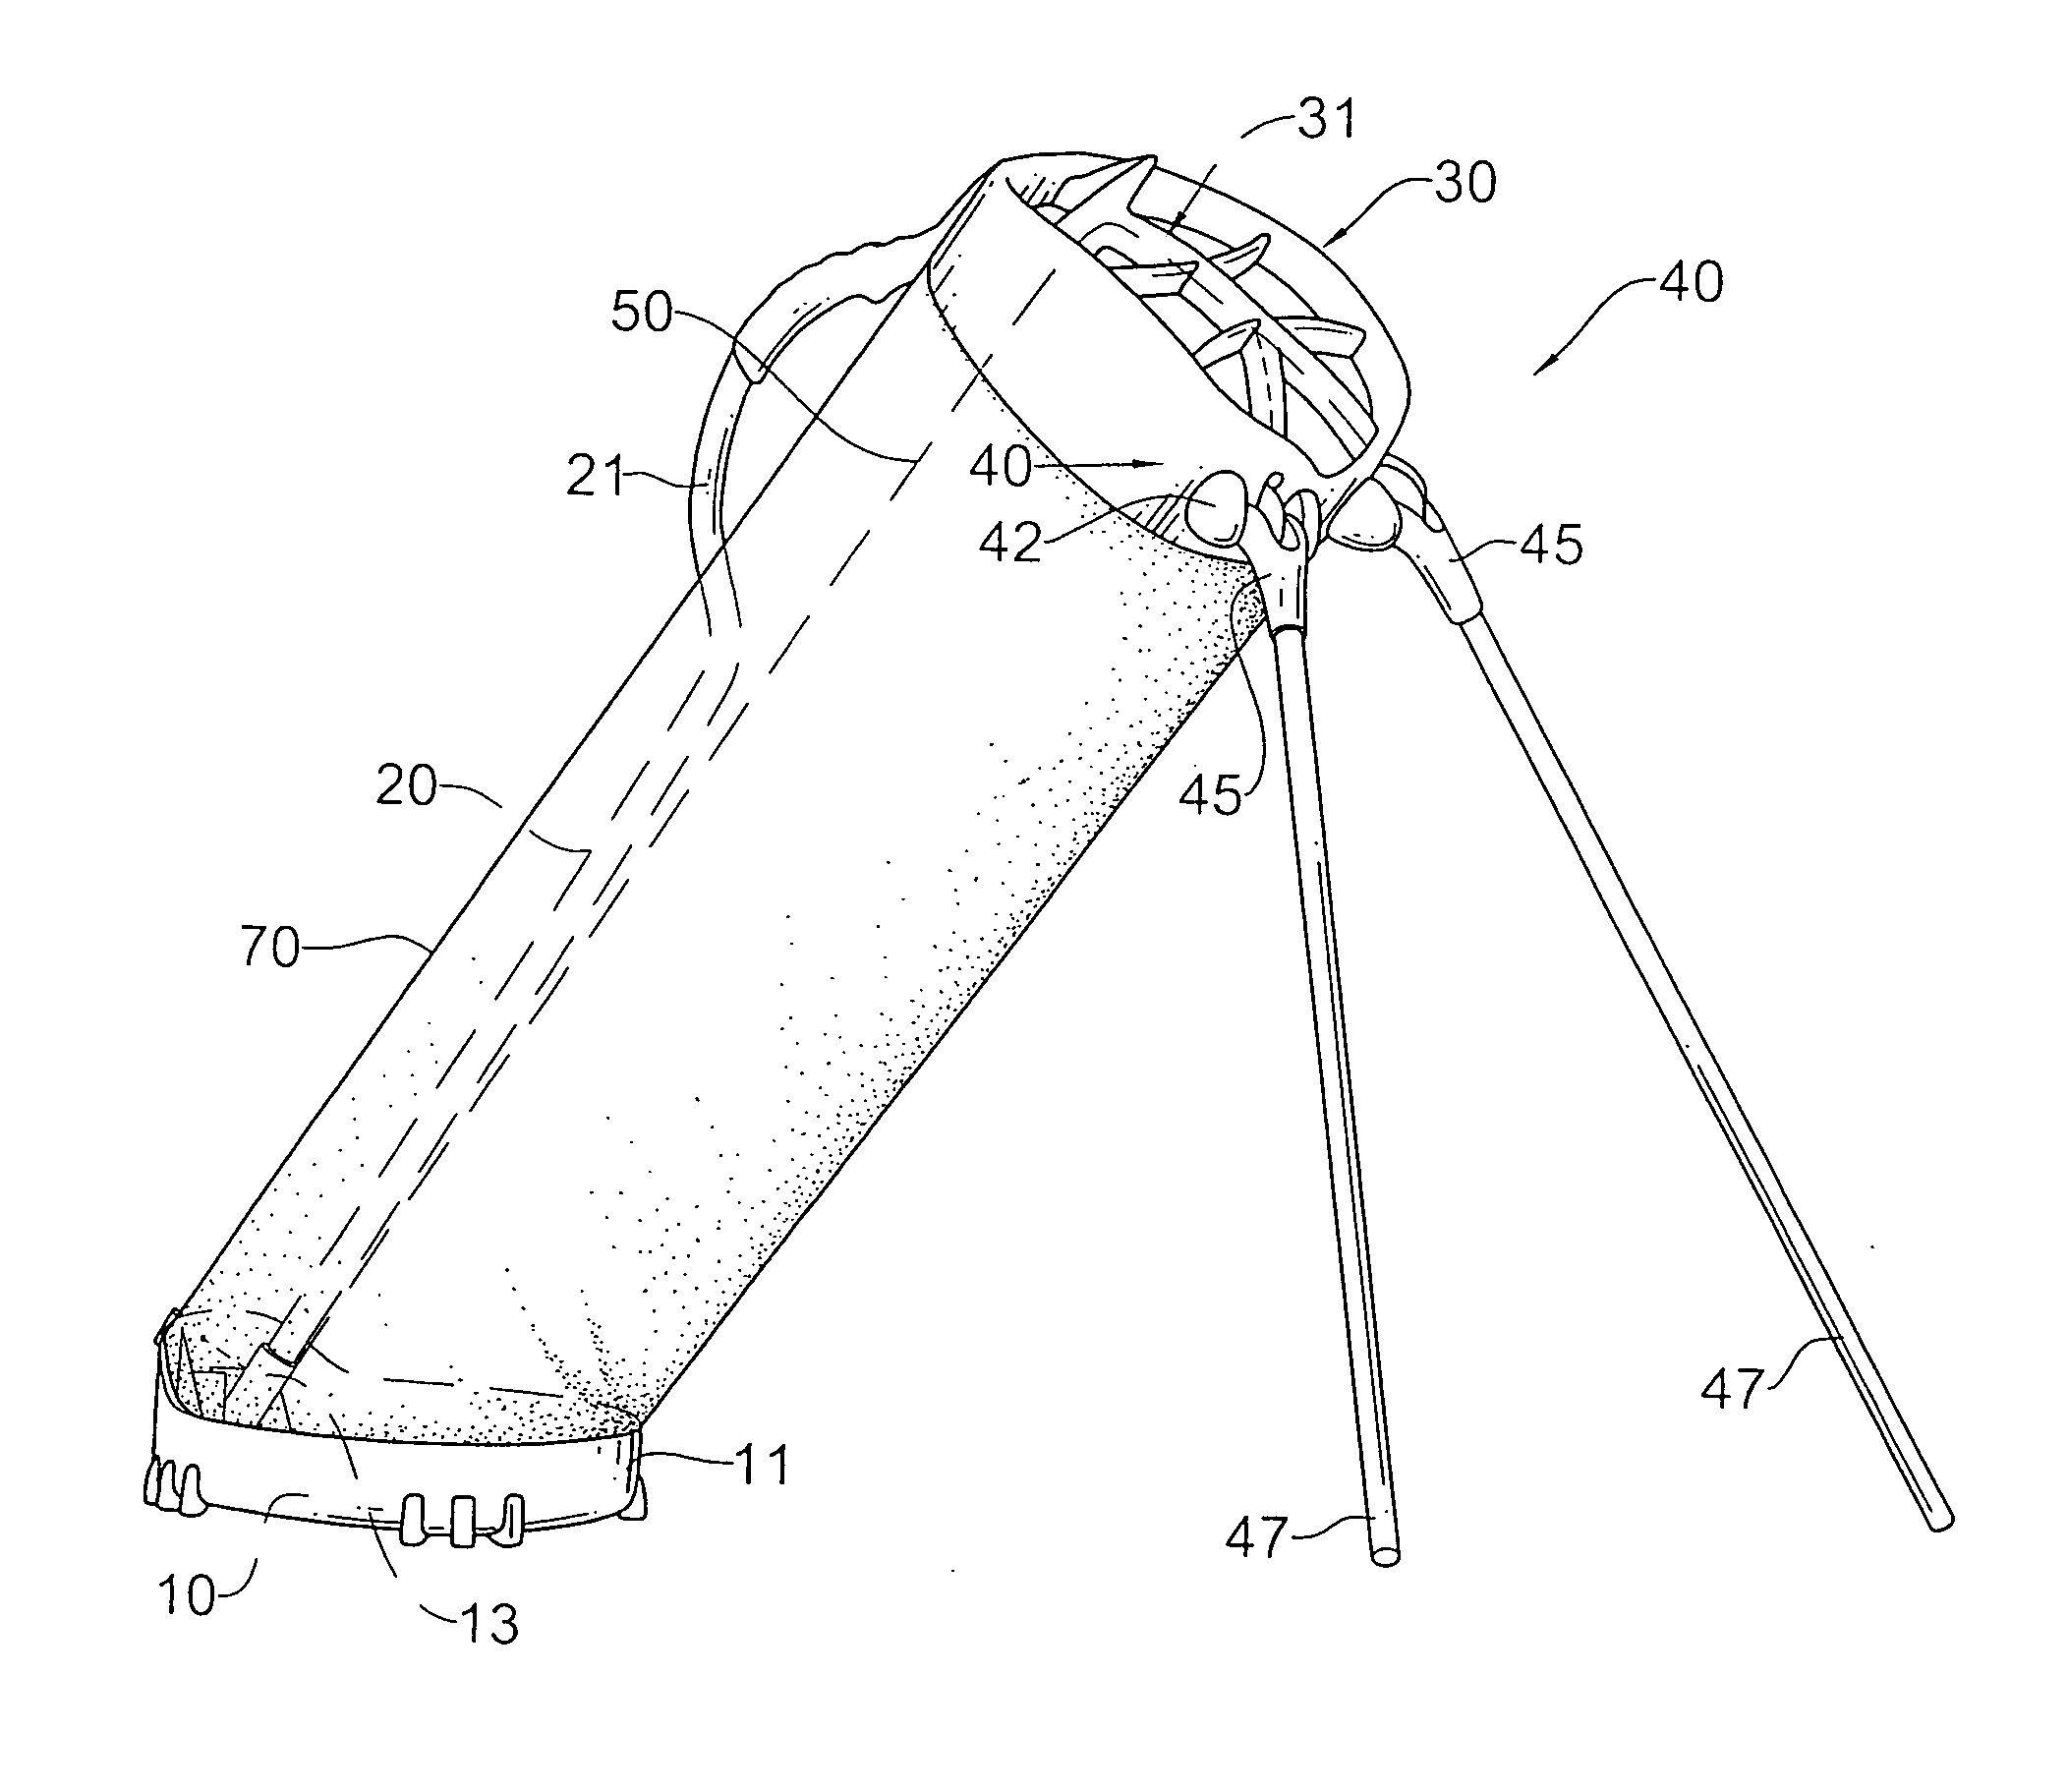 Golf bag structure with two leg assemblies